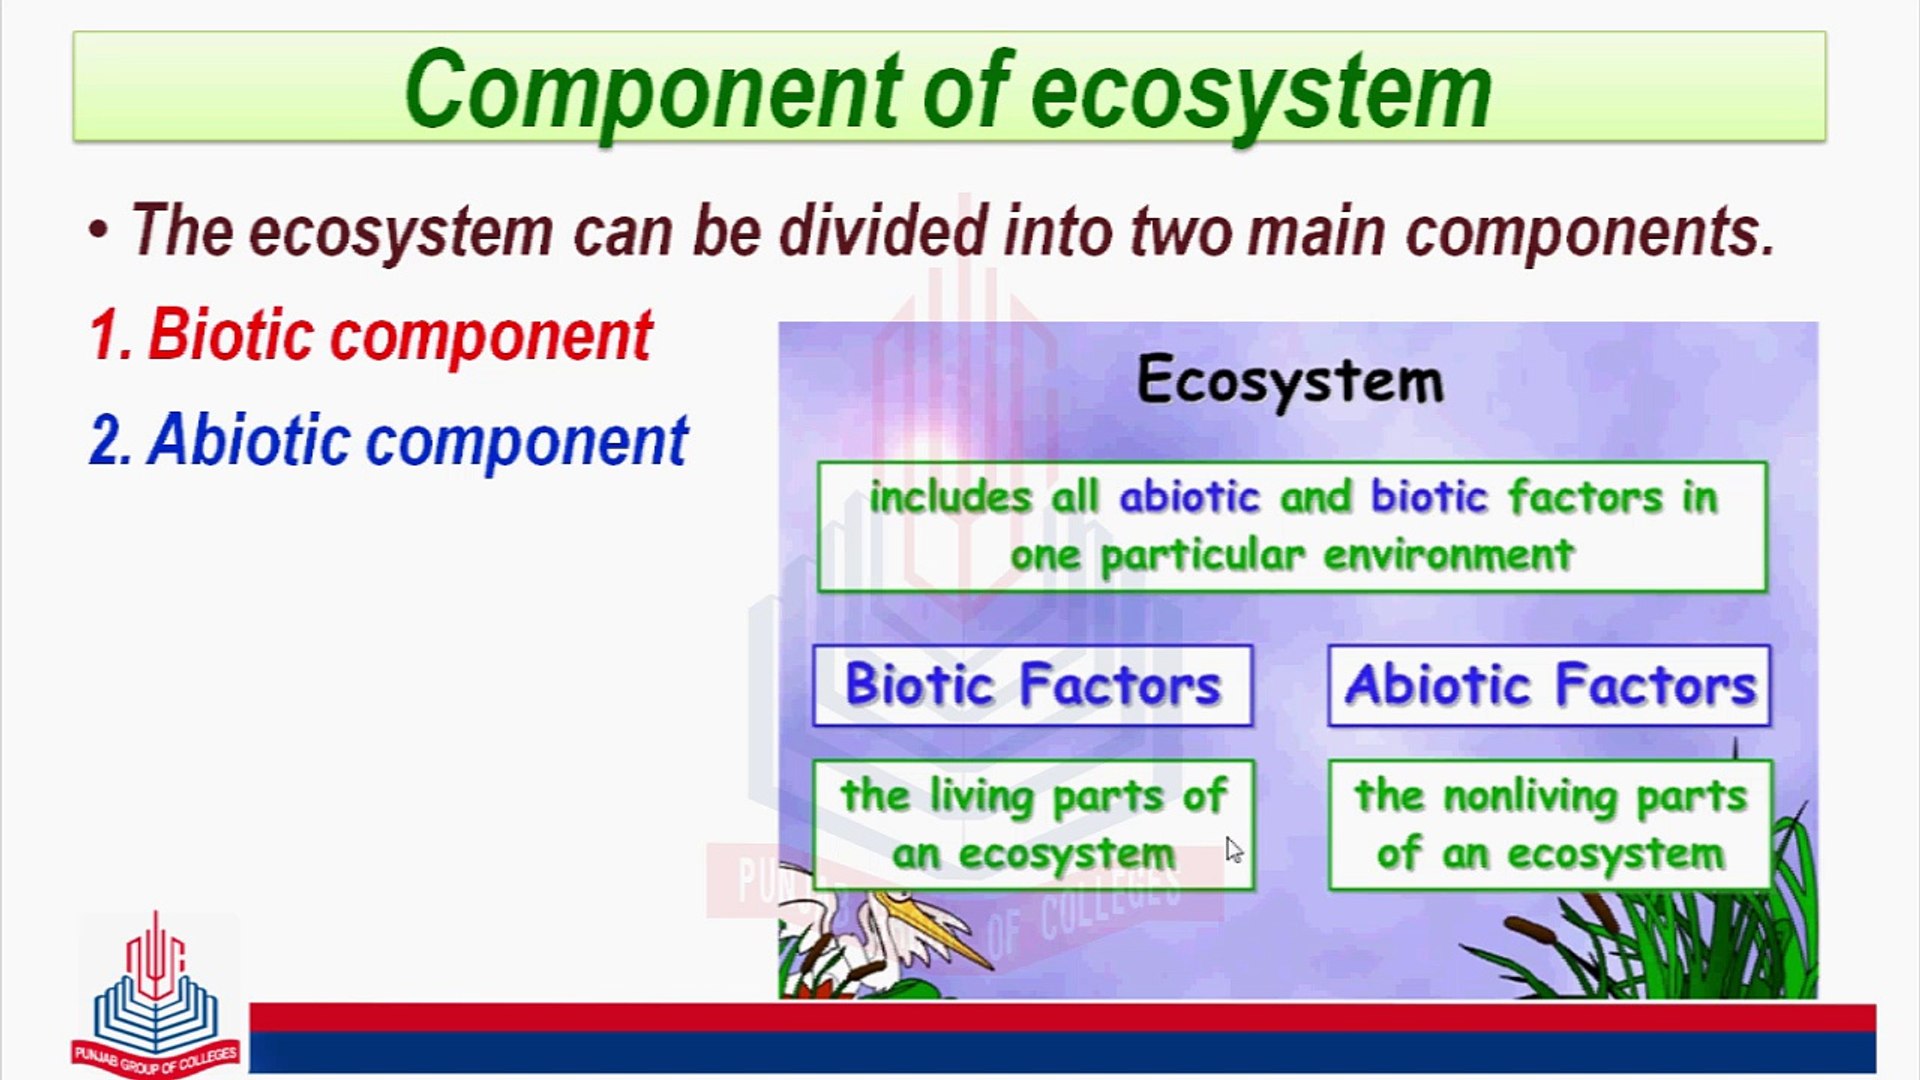 what are two biotic factors